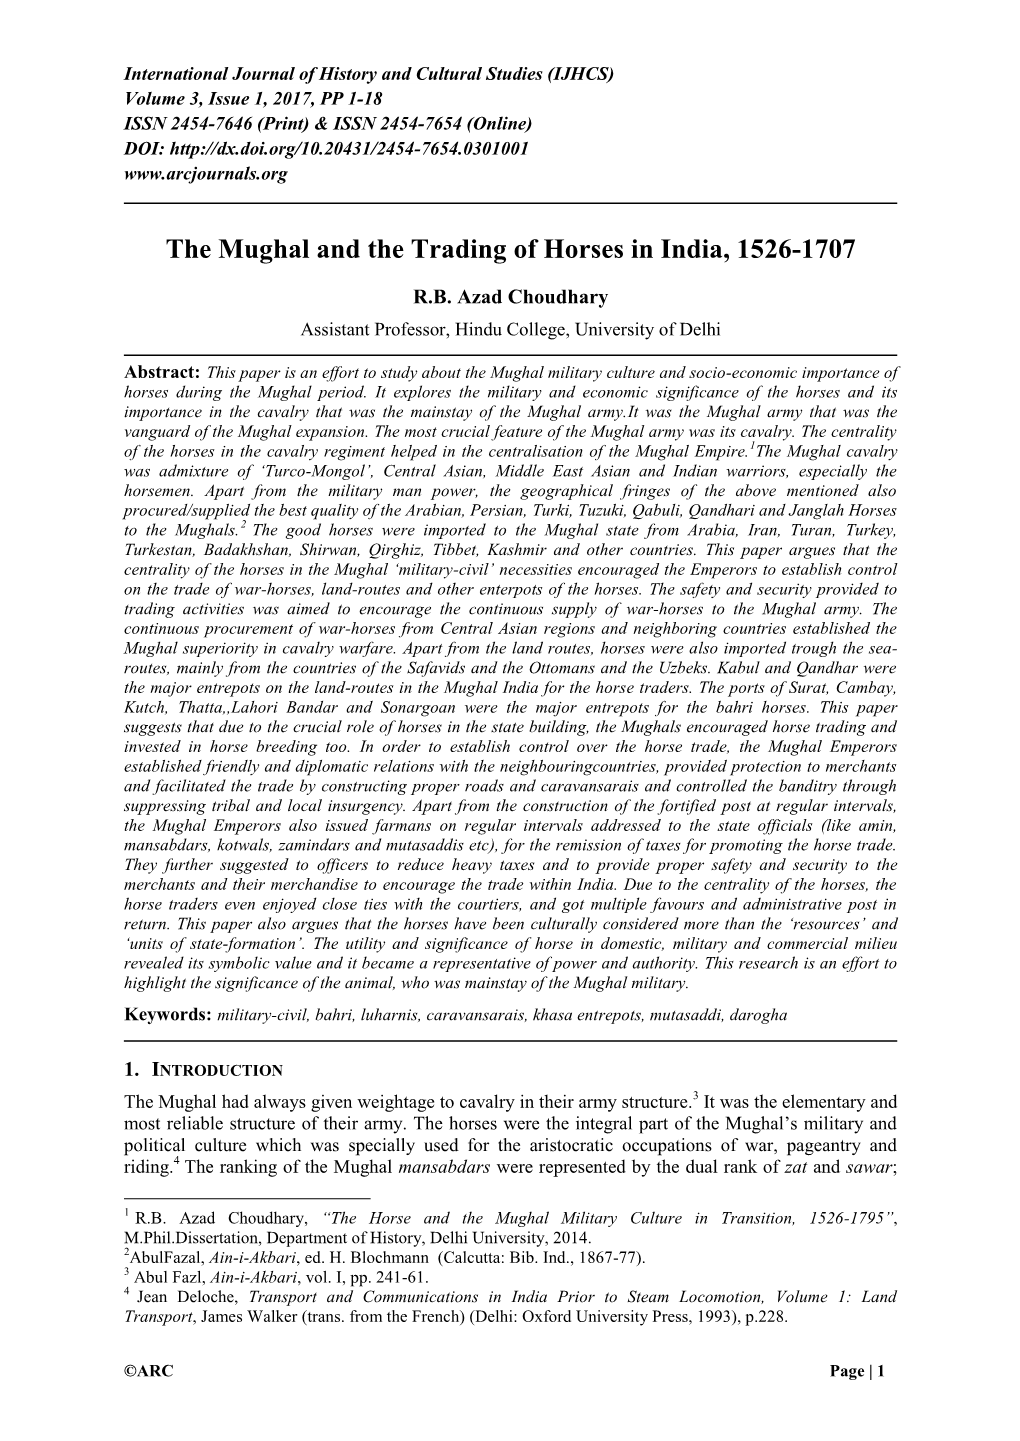 The Mughal and the Trading of Horses in India, 1526-1707